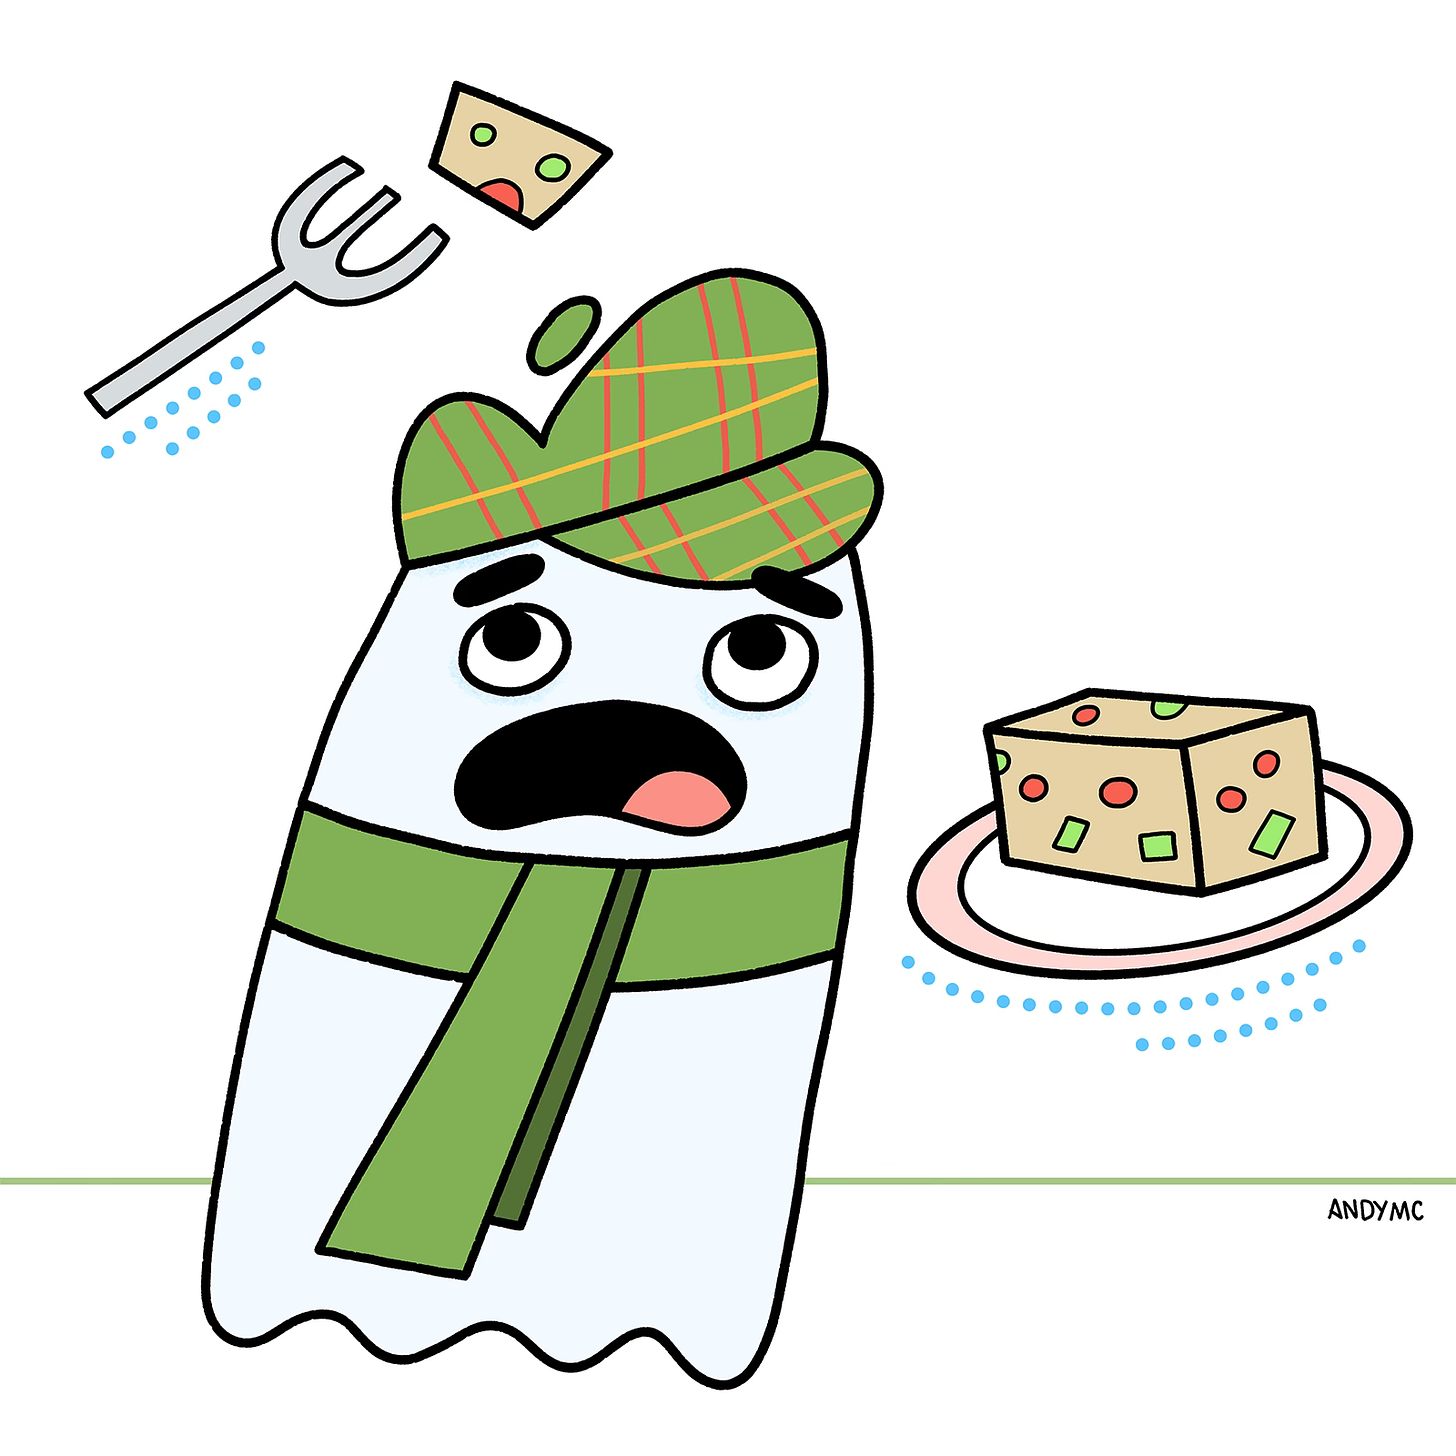 An illustration of a friendly ghost eating fruitcake 